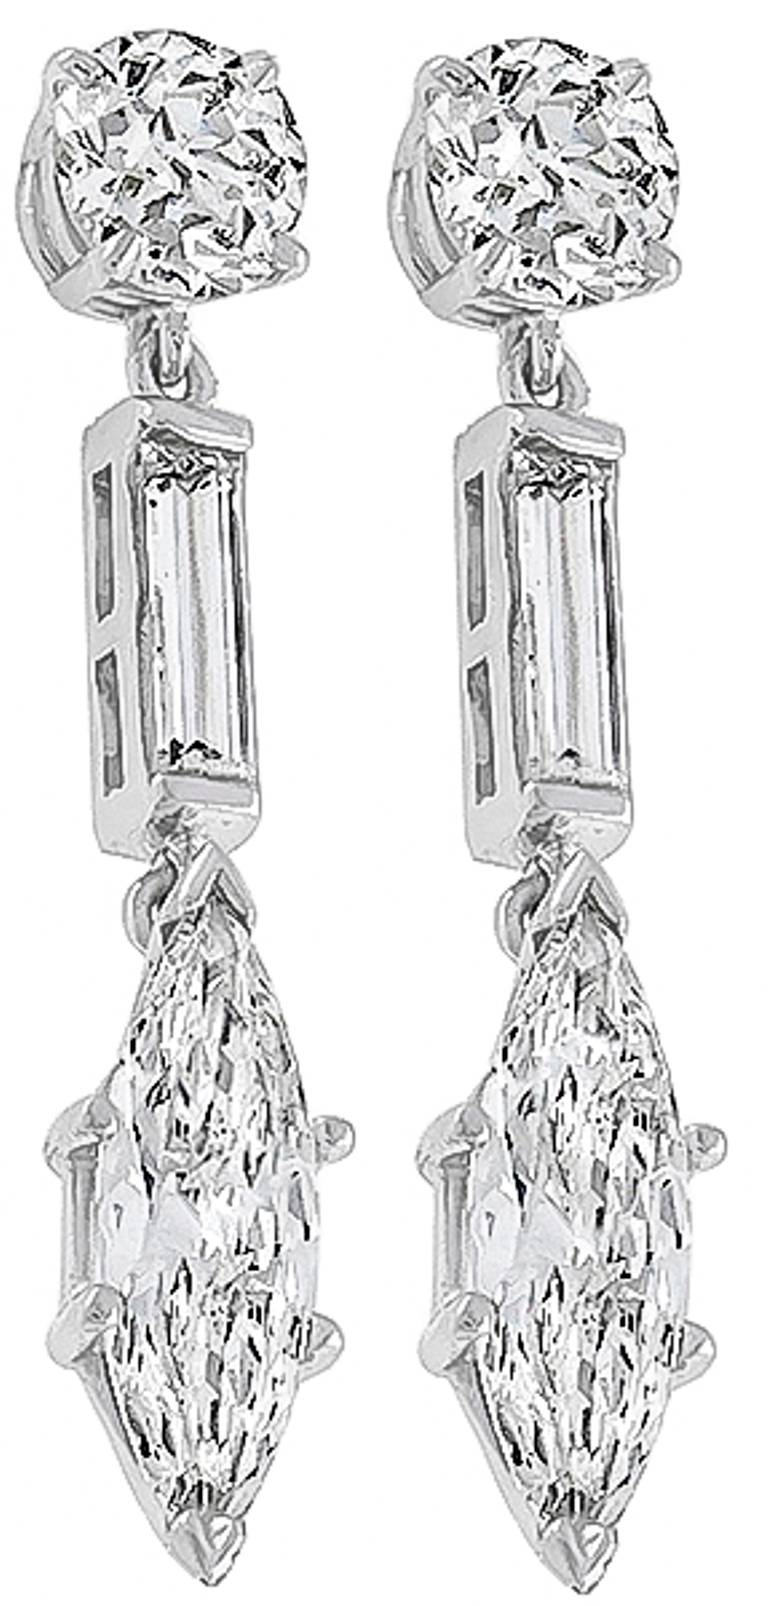 This elegant pair of earrings are set with round, baguette, and marquise cut diamonds weighing approximately 4.90 carat. The color of these diamonds are H-J with VS clarity.

Inventory #71017KWSS